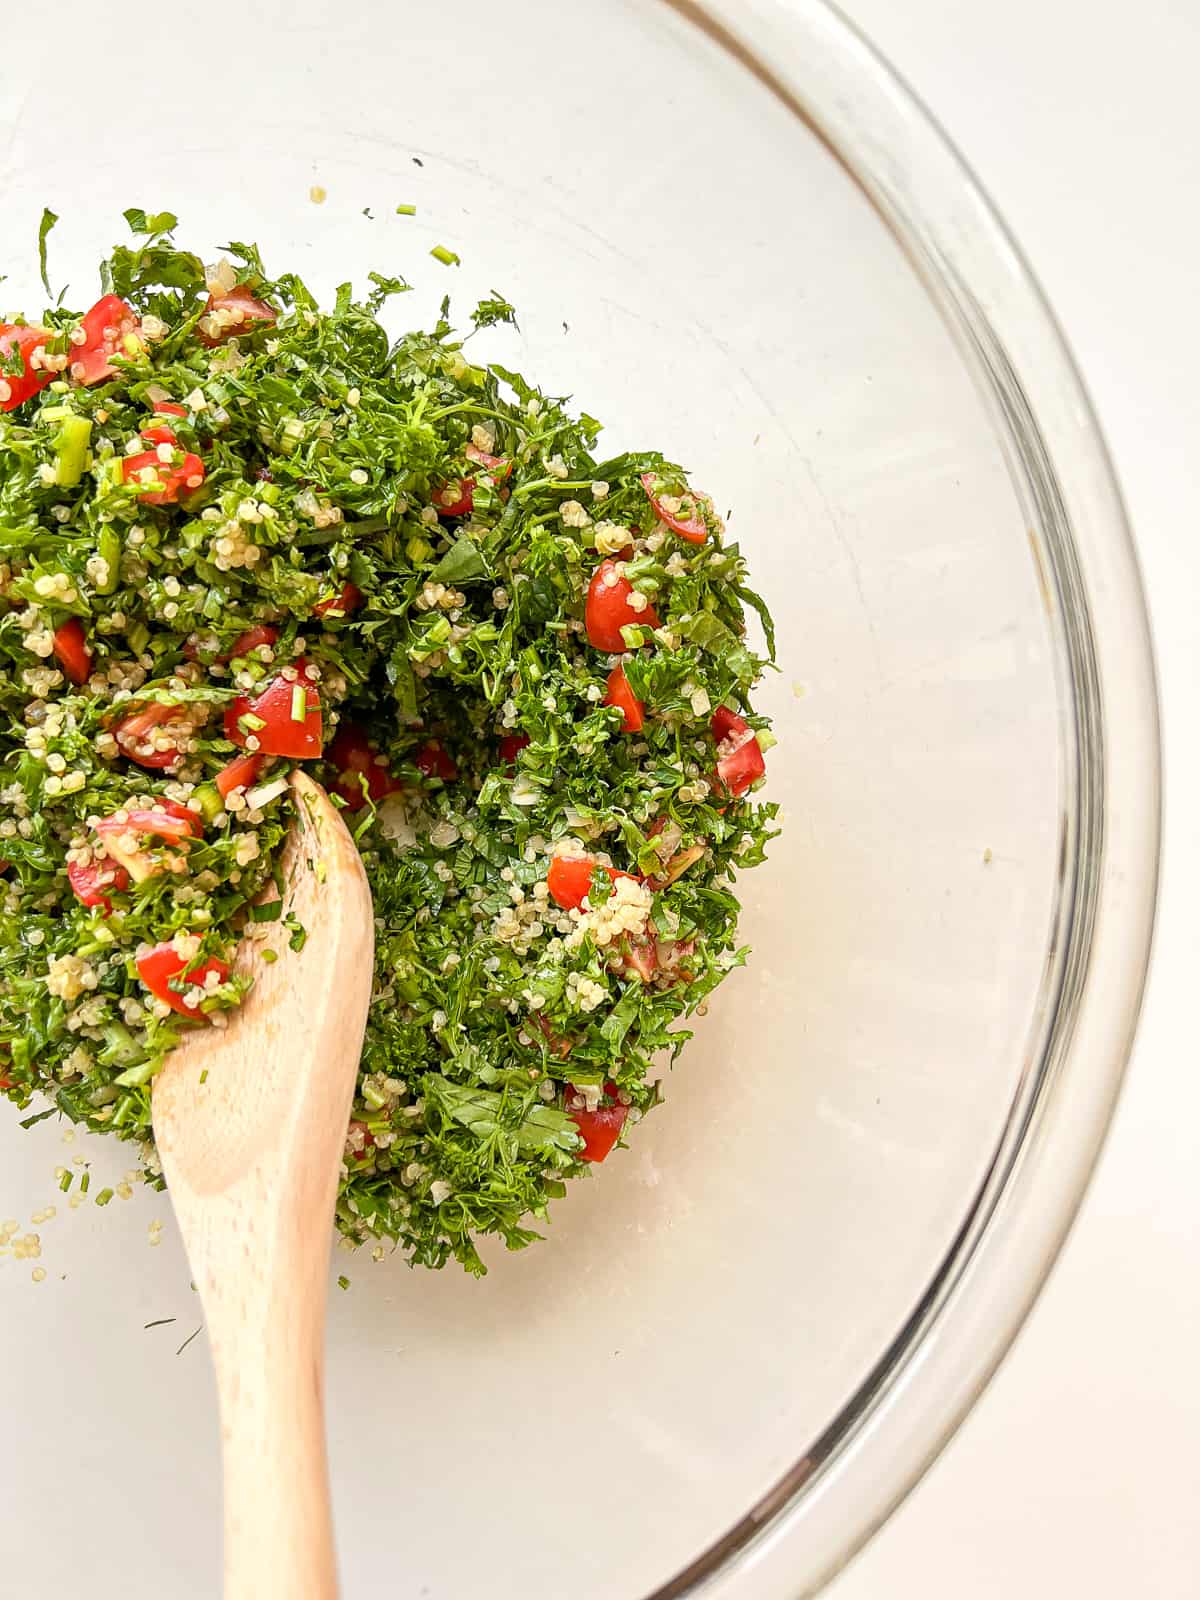 An image of tabbouleh being mixed in a glass mixing bowl.